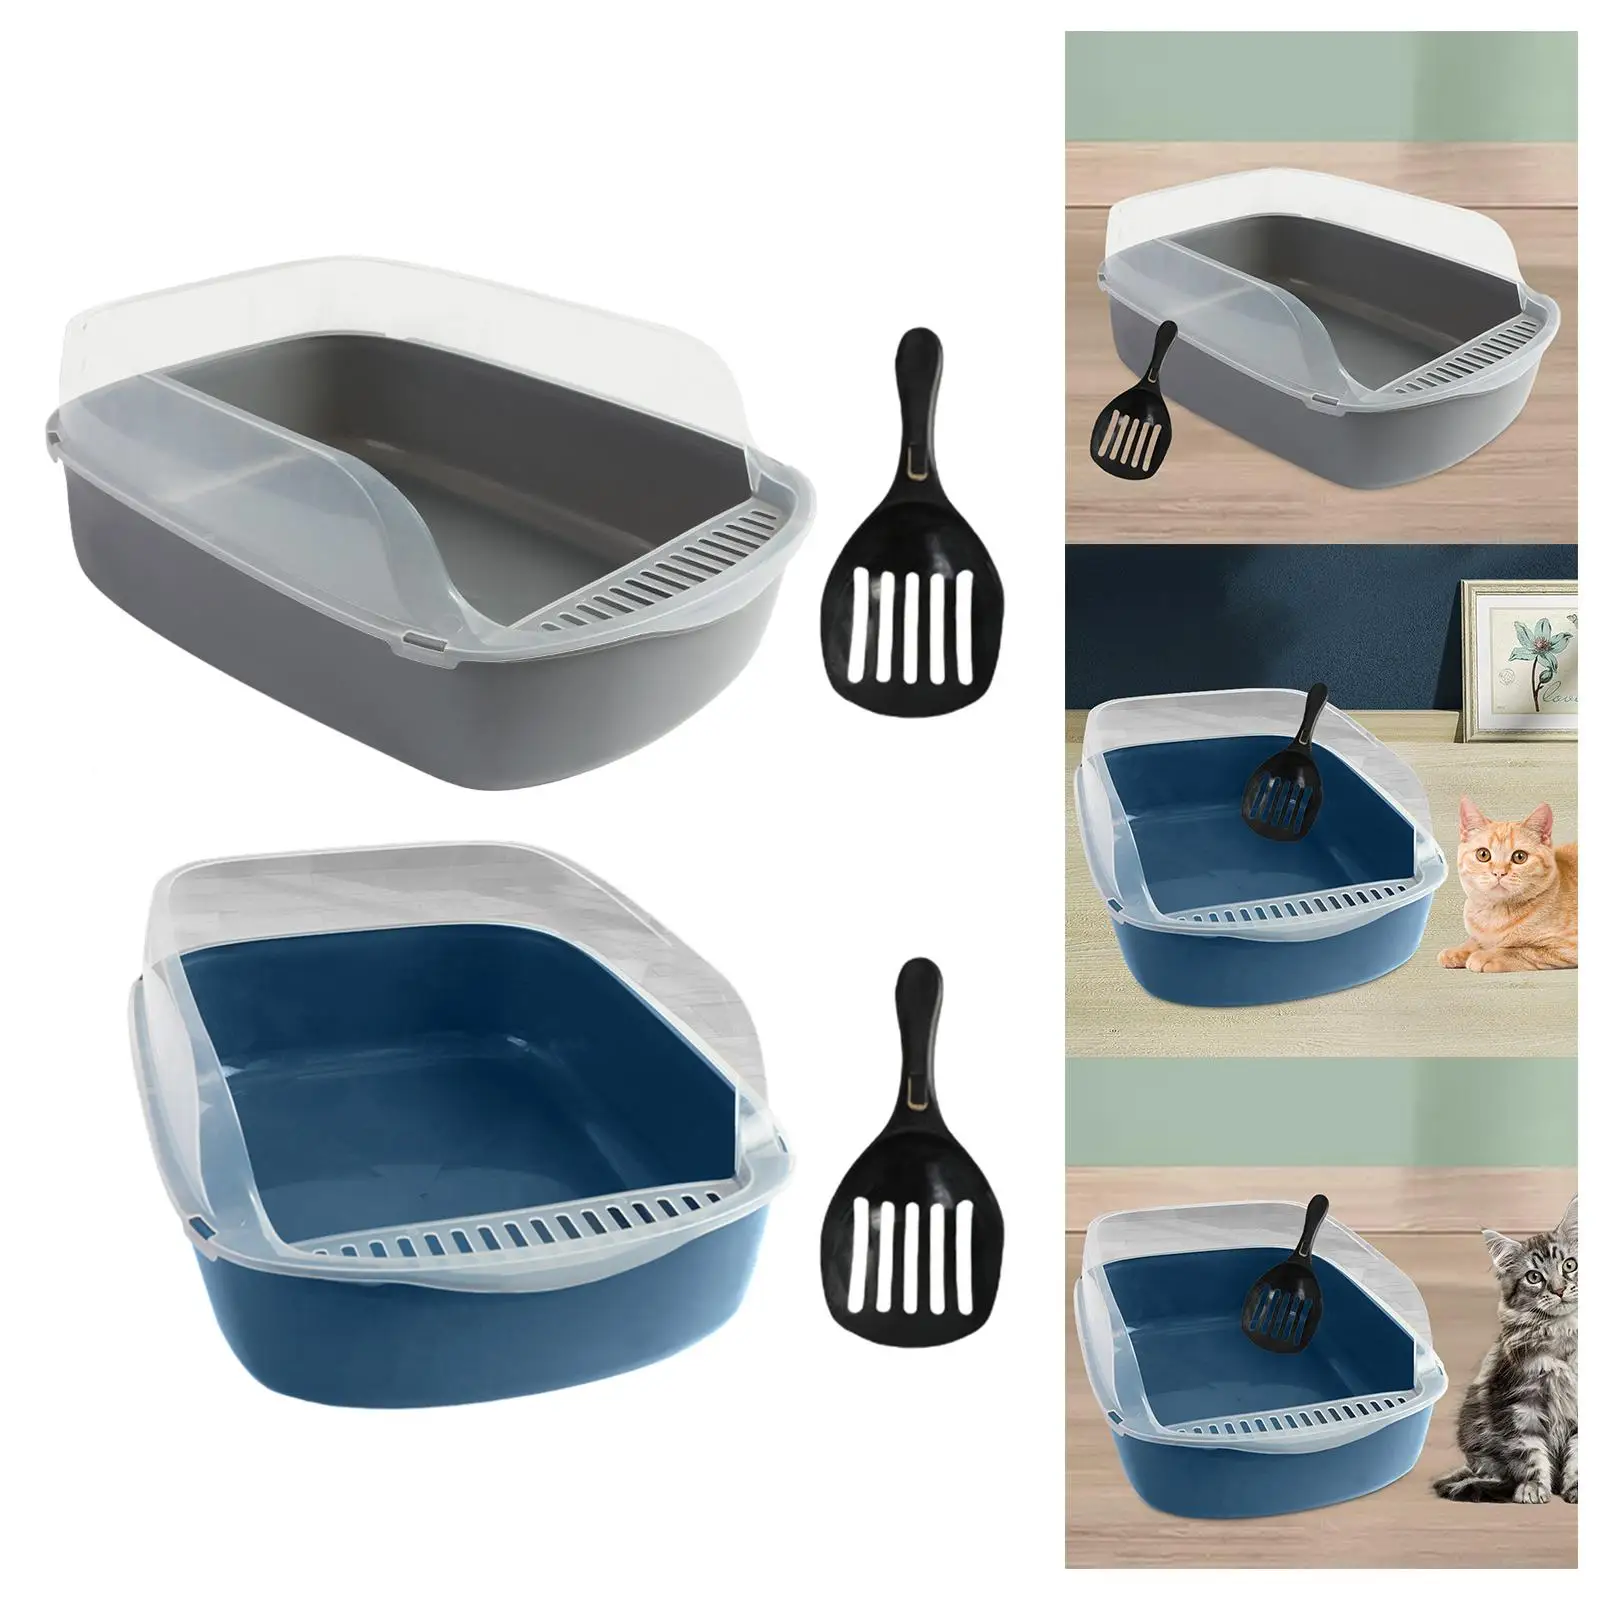 Cat Litter Box Large Space Portable with High Side Bedpan Semi Closed Cat Sand Box Container for Small Pets Medium Large Cats